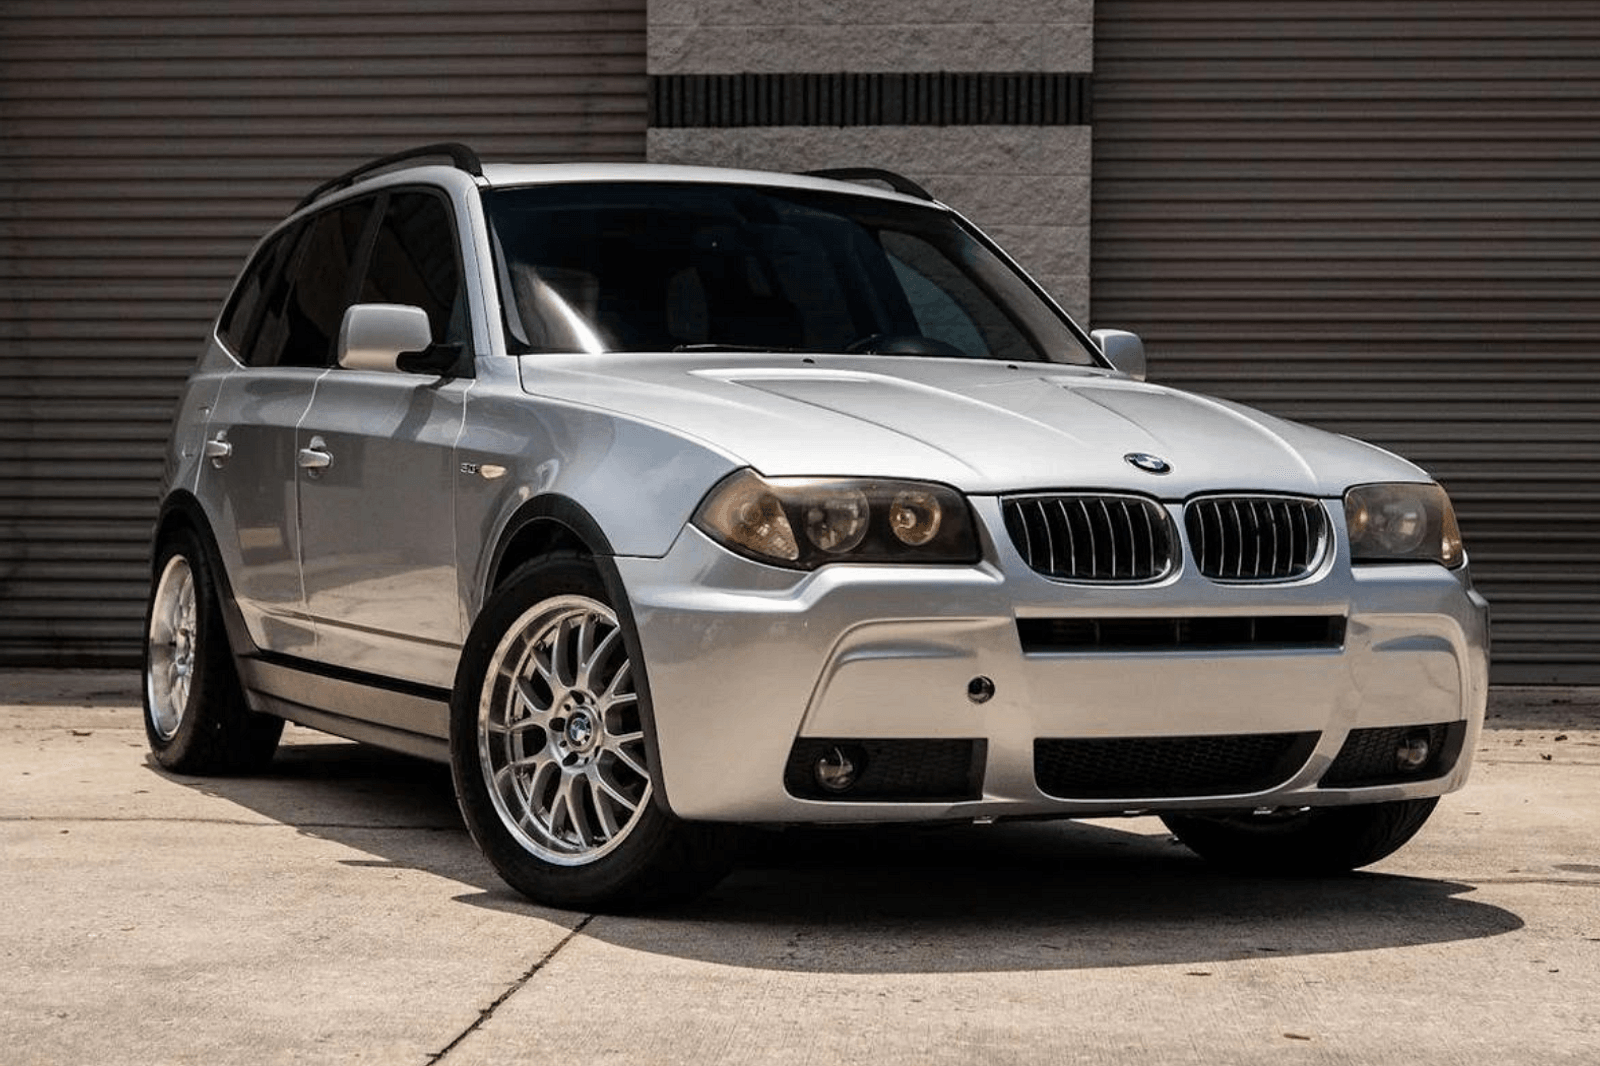 BMW X3 With E46 M3 Engine And Six-Speed Manual Is A $20,000 Bargain